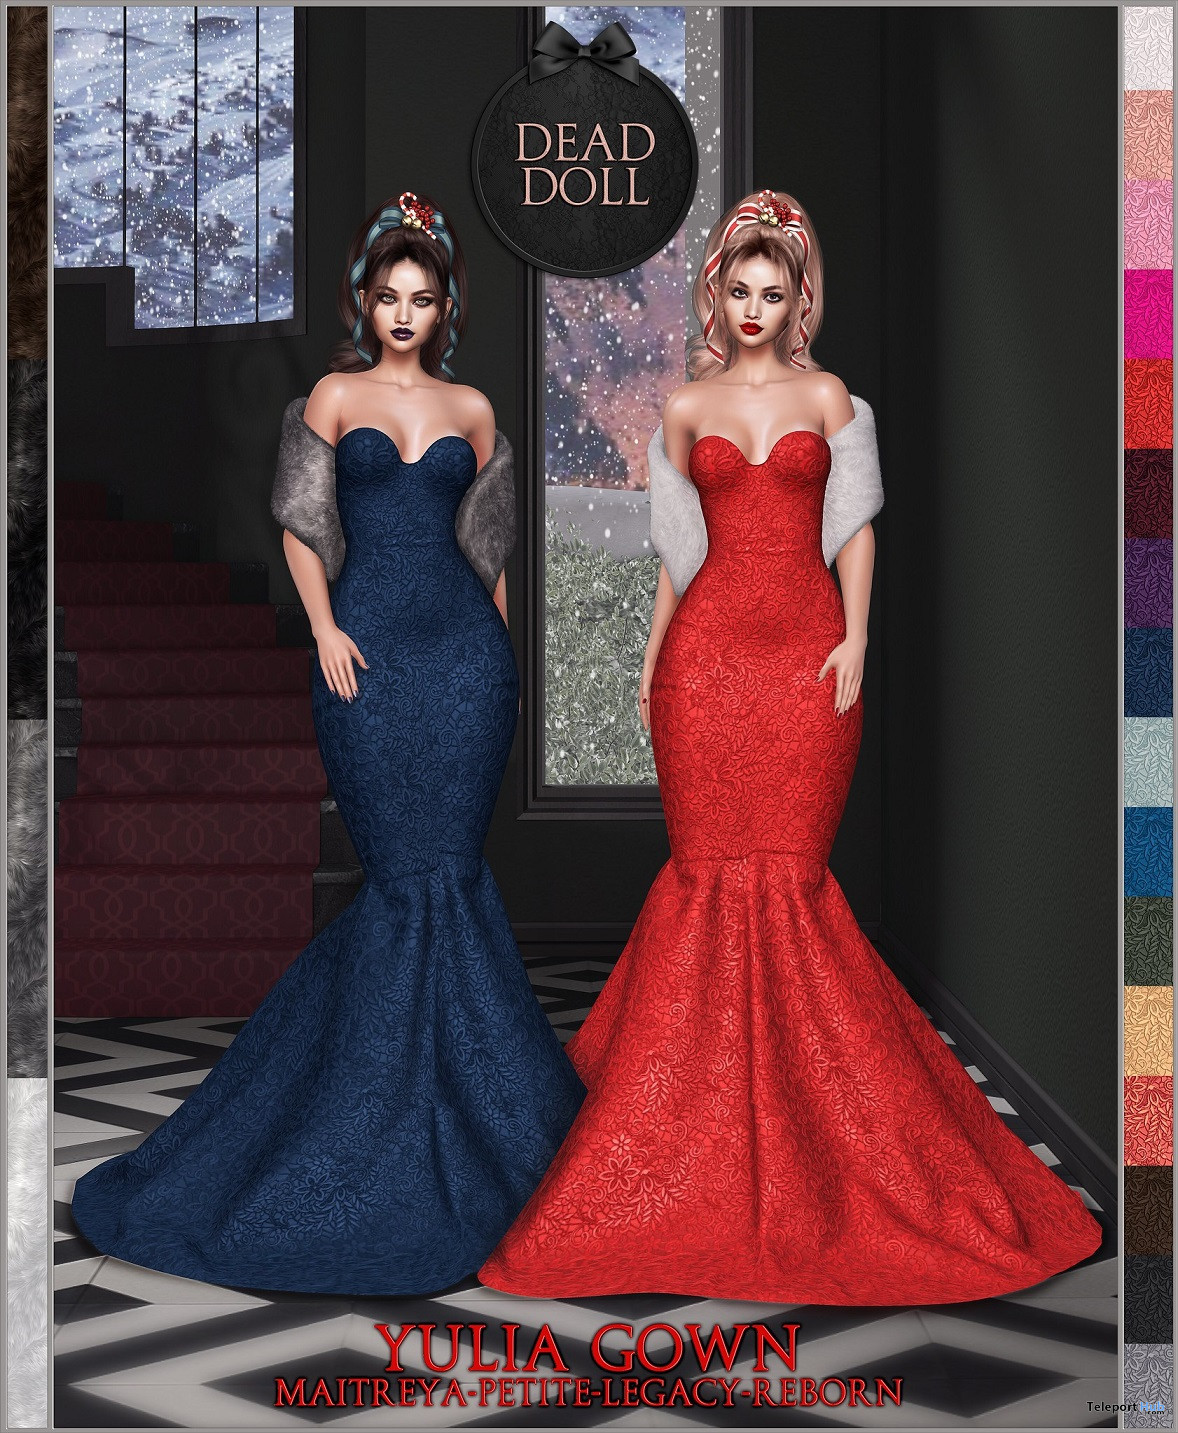 Yulia Gown & Fur Shawl Fatpack December 2022 Group Gift by DEAD DOLL - Teleport Hub - teleporthub.com